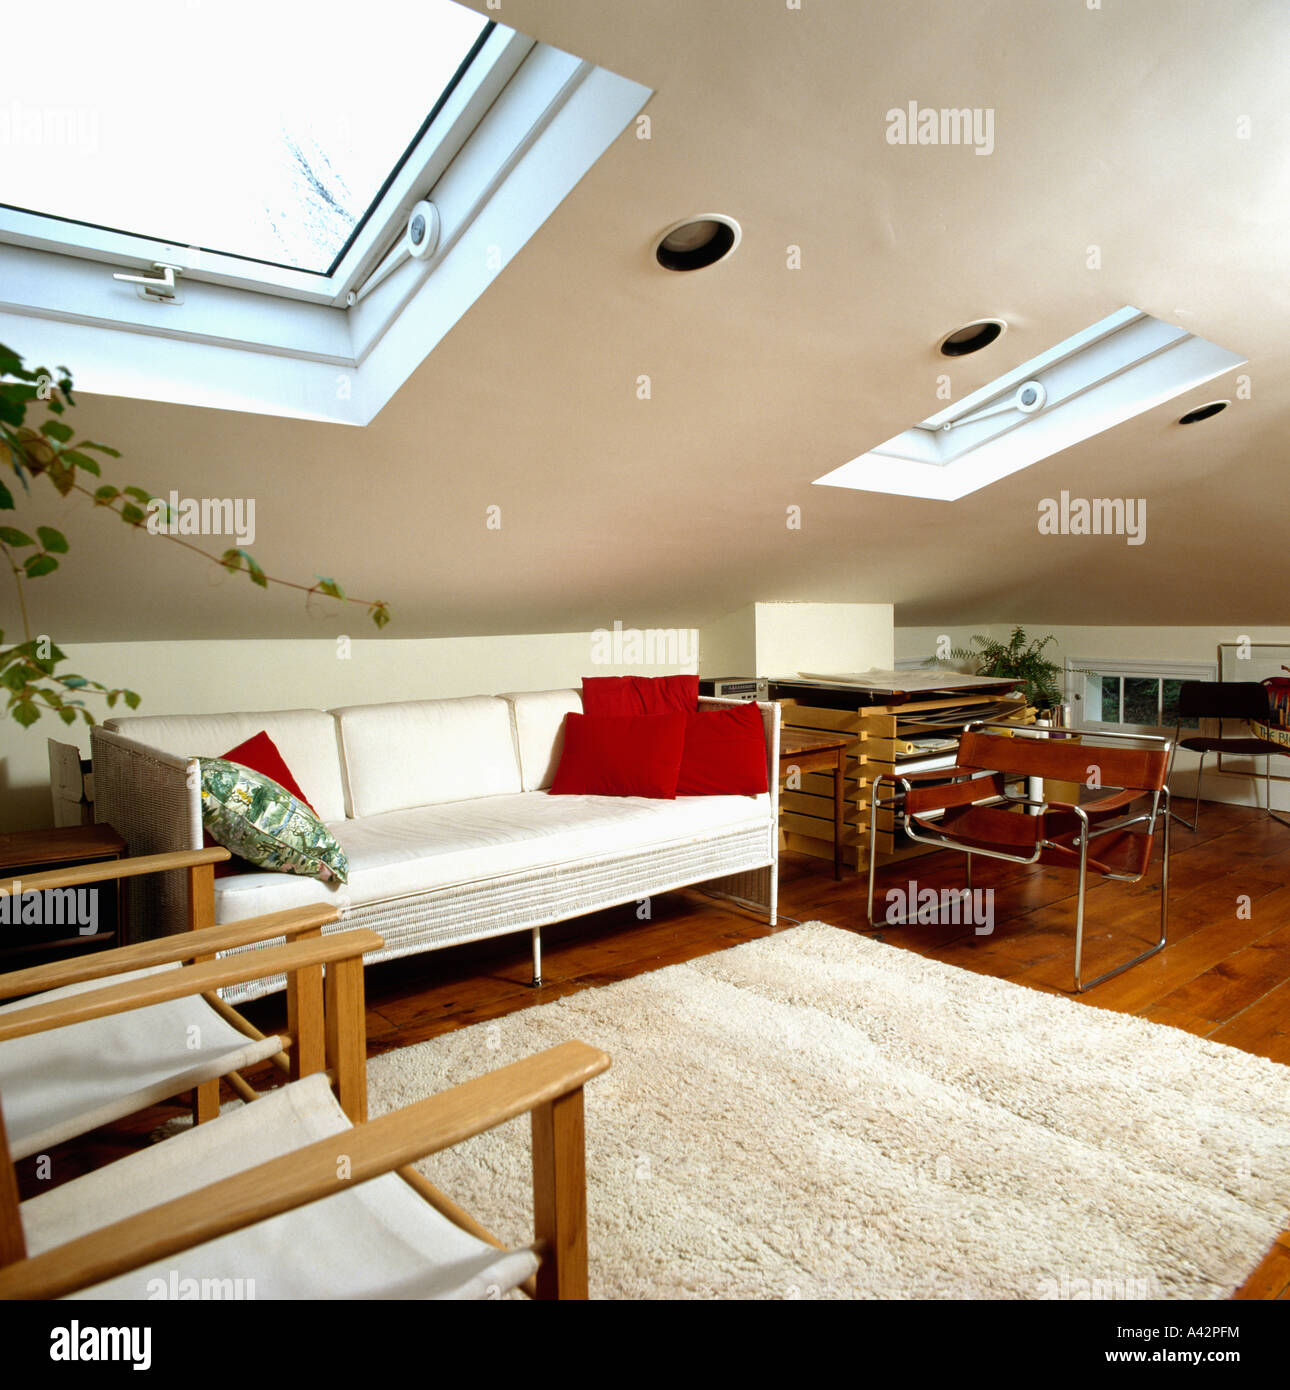 Velux windows and white sofa in modern loft conversion living room with sheepskin rug and Marcel Breuer Wassily chair Stock Photo